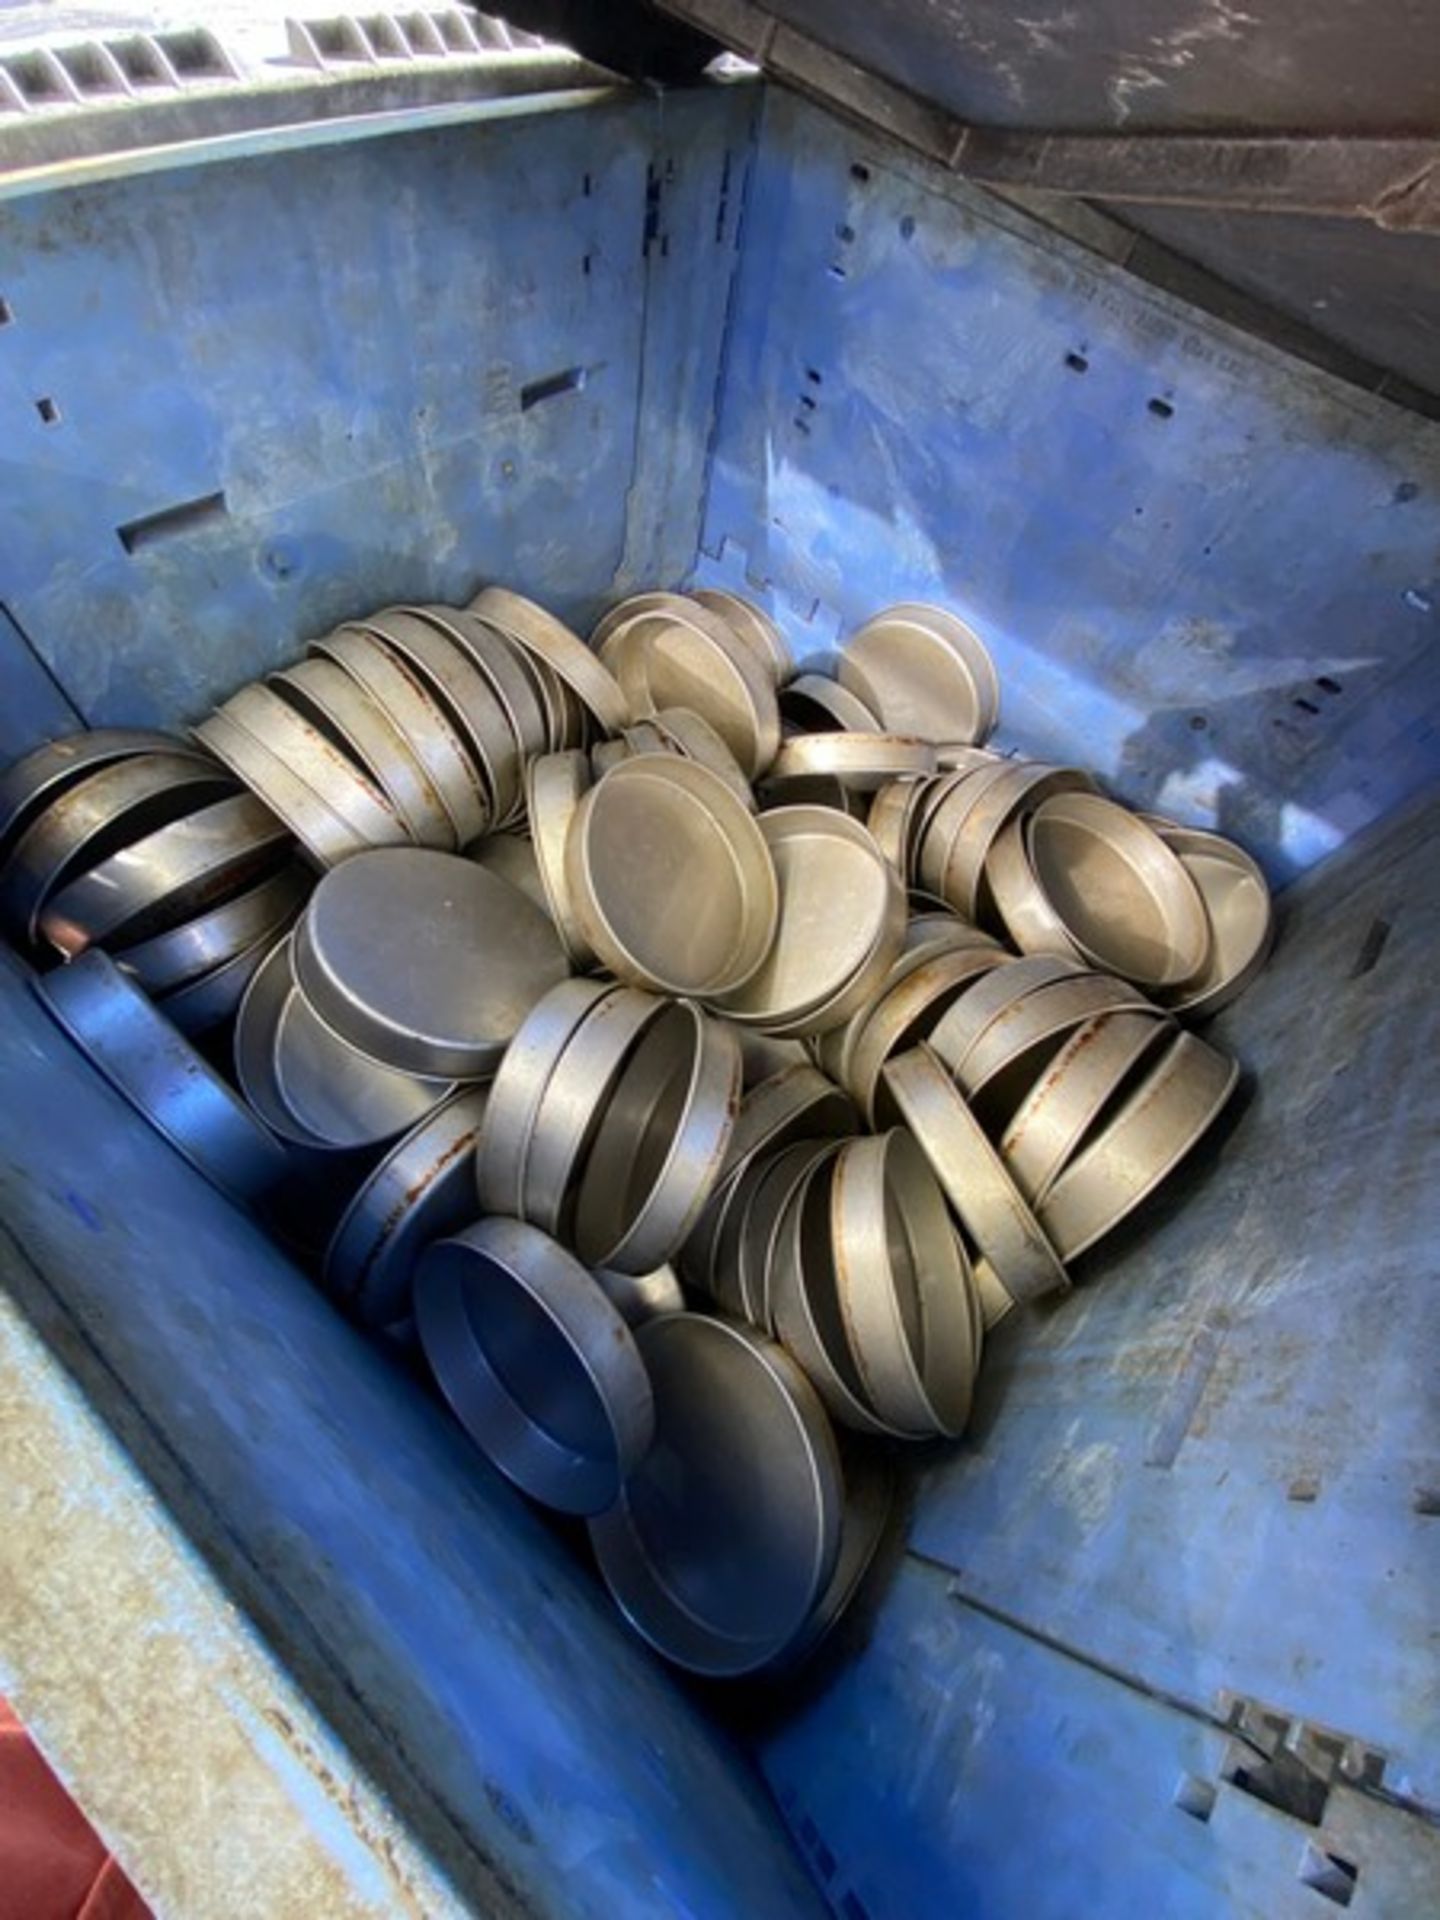 Lot of Assorted 8” Round Aluminum Pans, Aprox. (200) Pans with Aprox. 48” L x 45” W x 49” H - Image 3 of 3